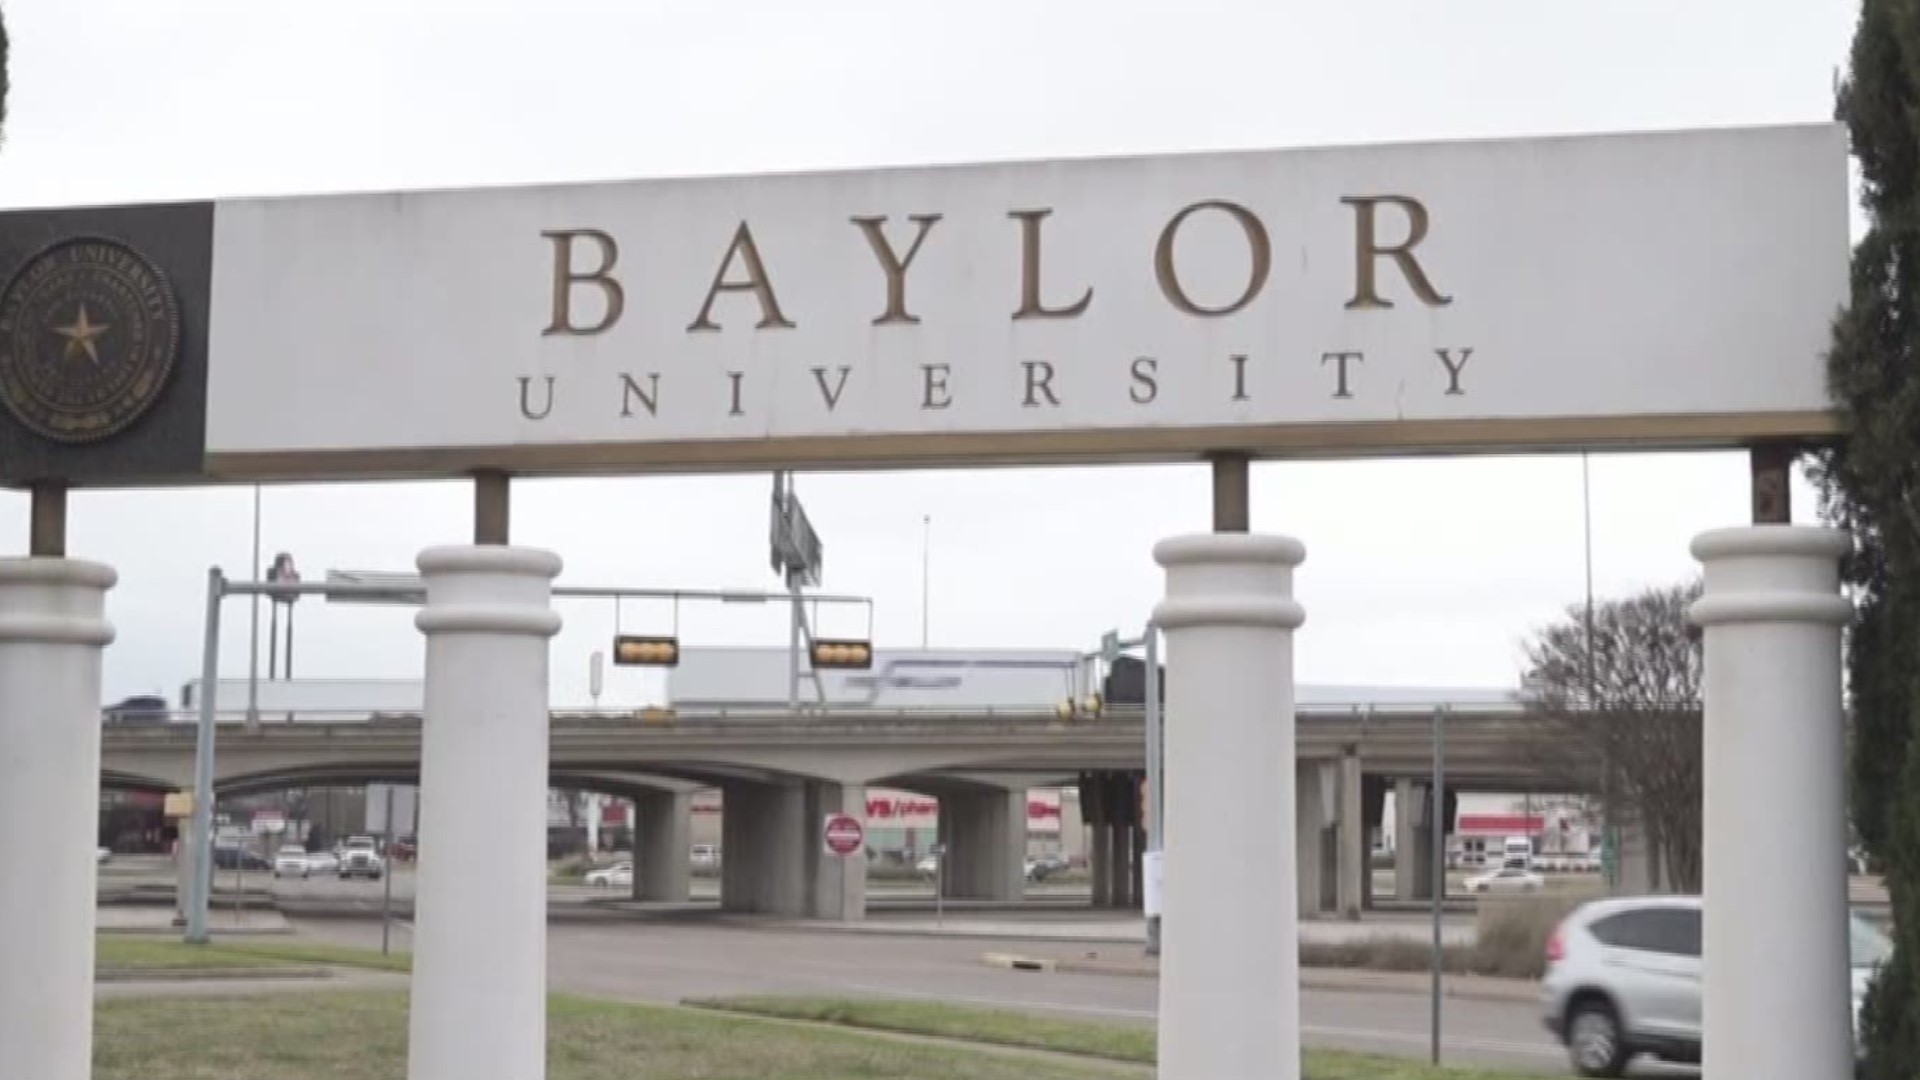 Three rapes were reported to Title IX from the same dorm at Baylor University, according to the campus crime log on the university website.